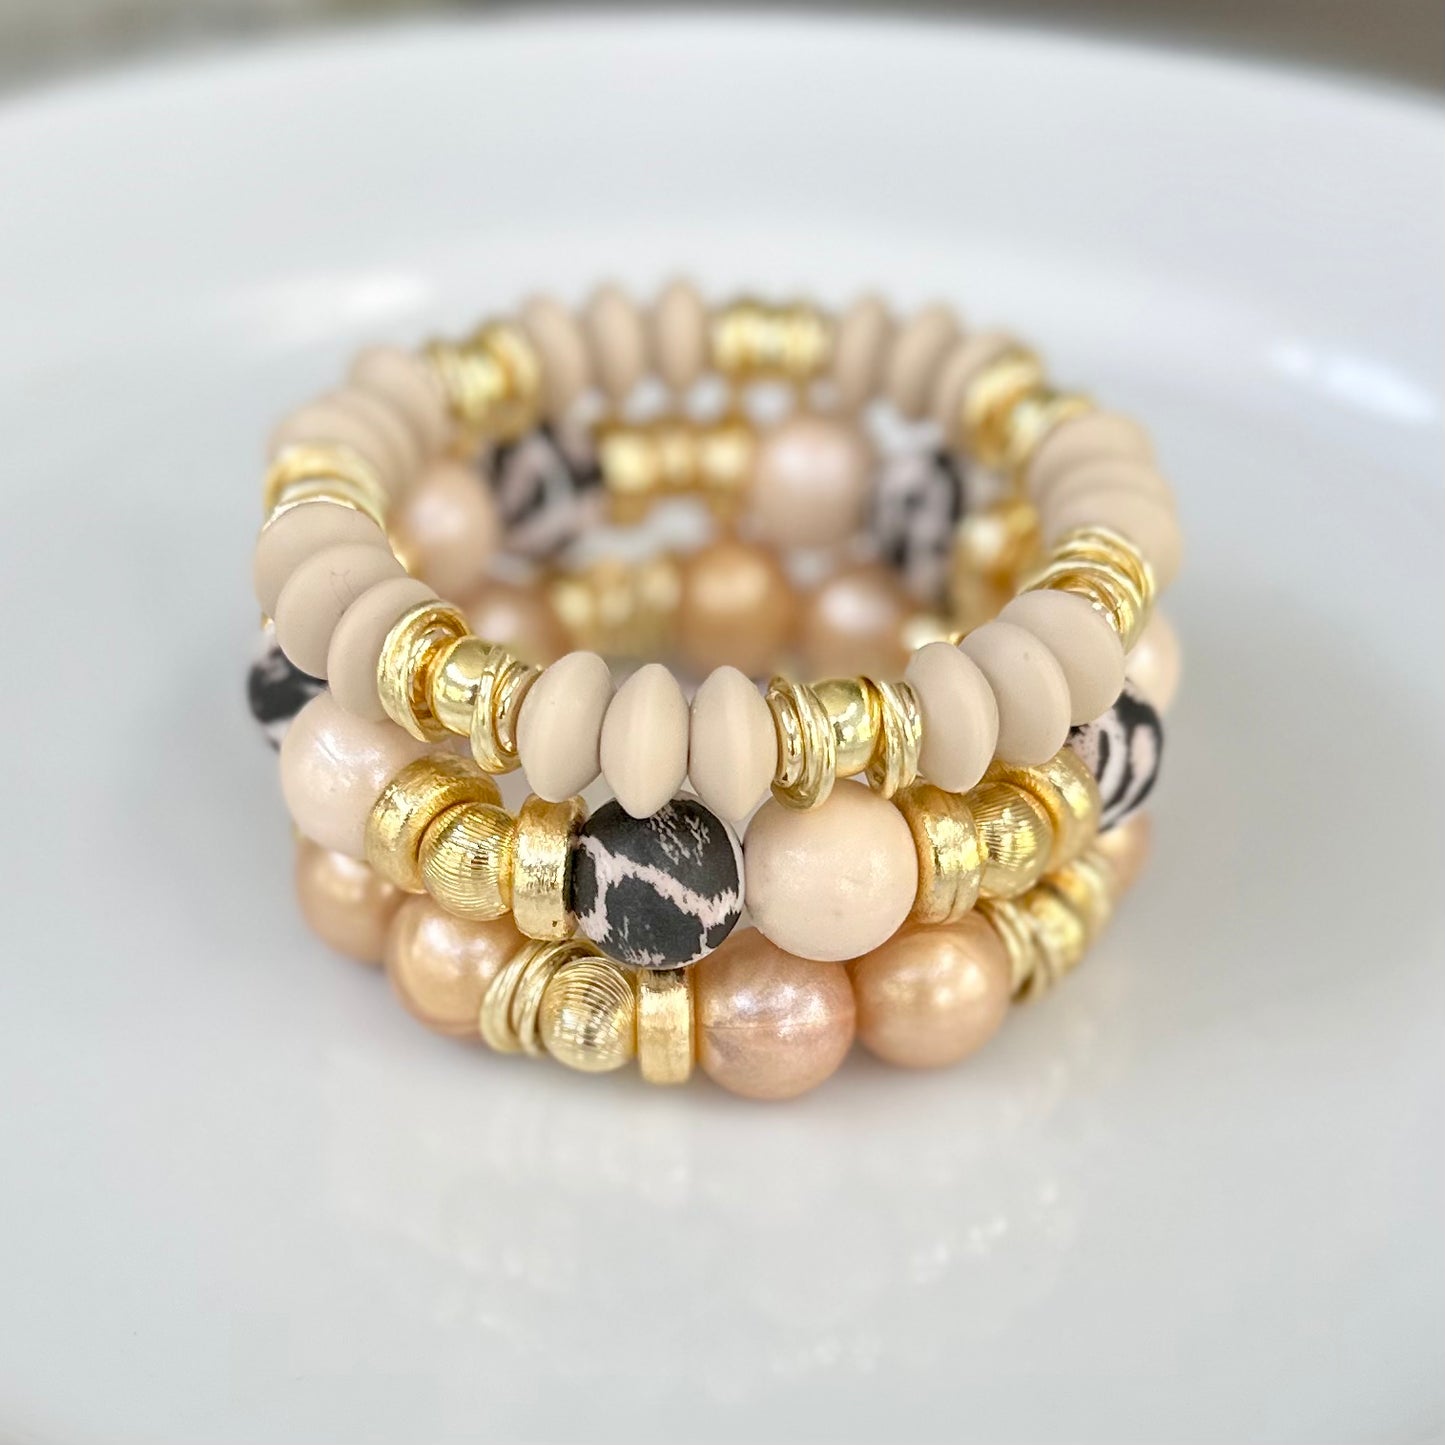 NEW! TAUPE COIL BRACELET WITH GOLD ACCENTS